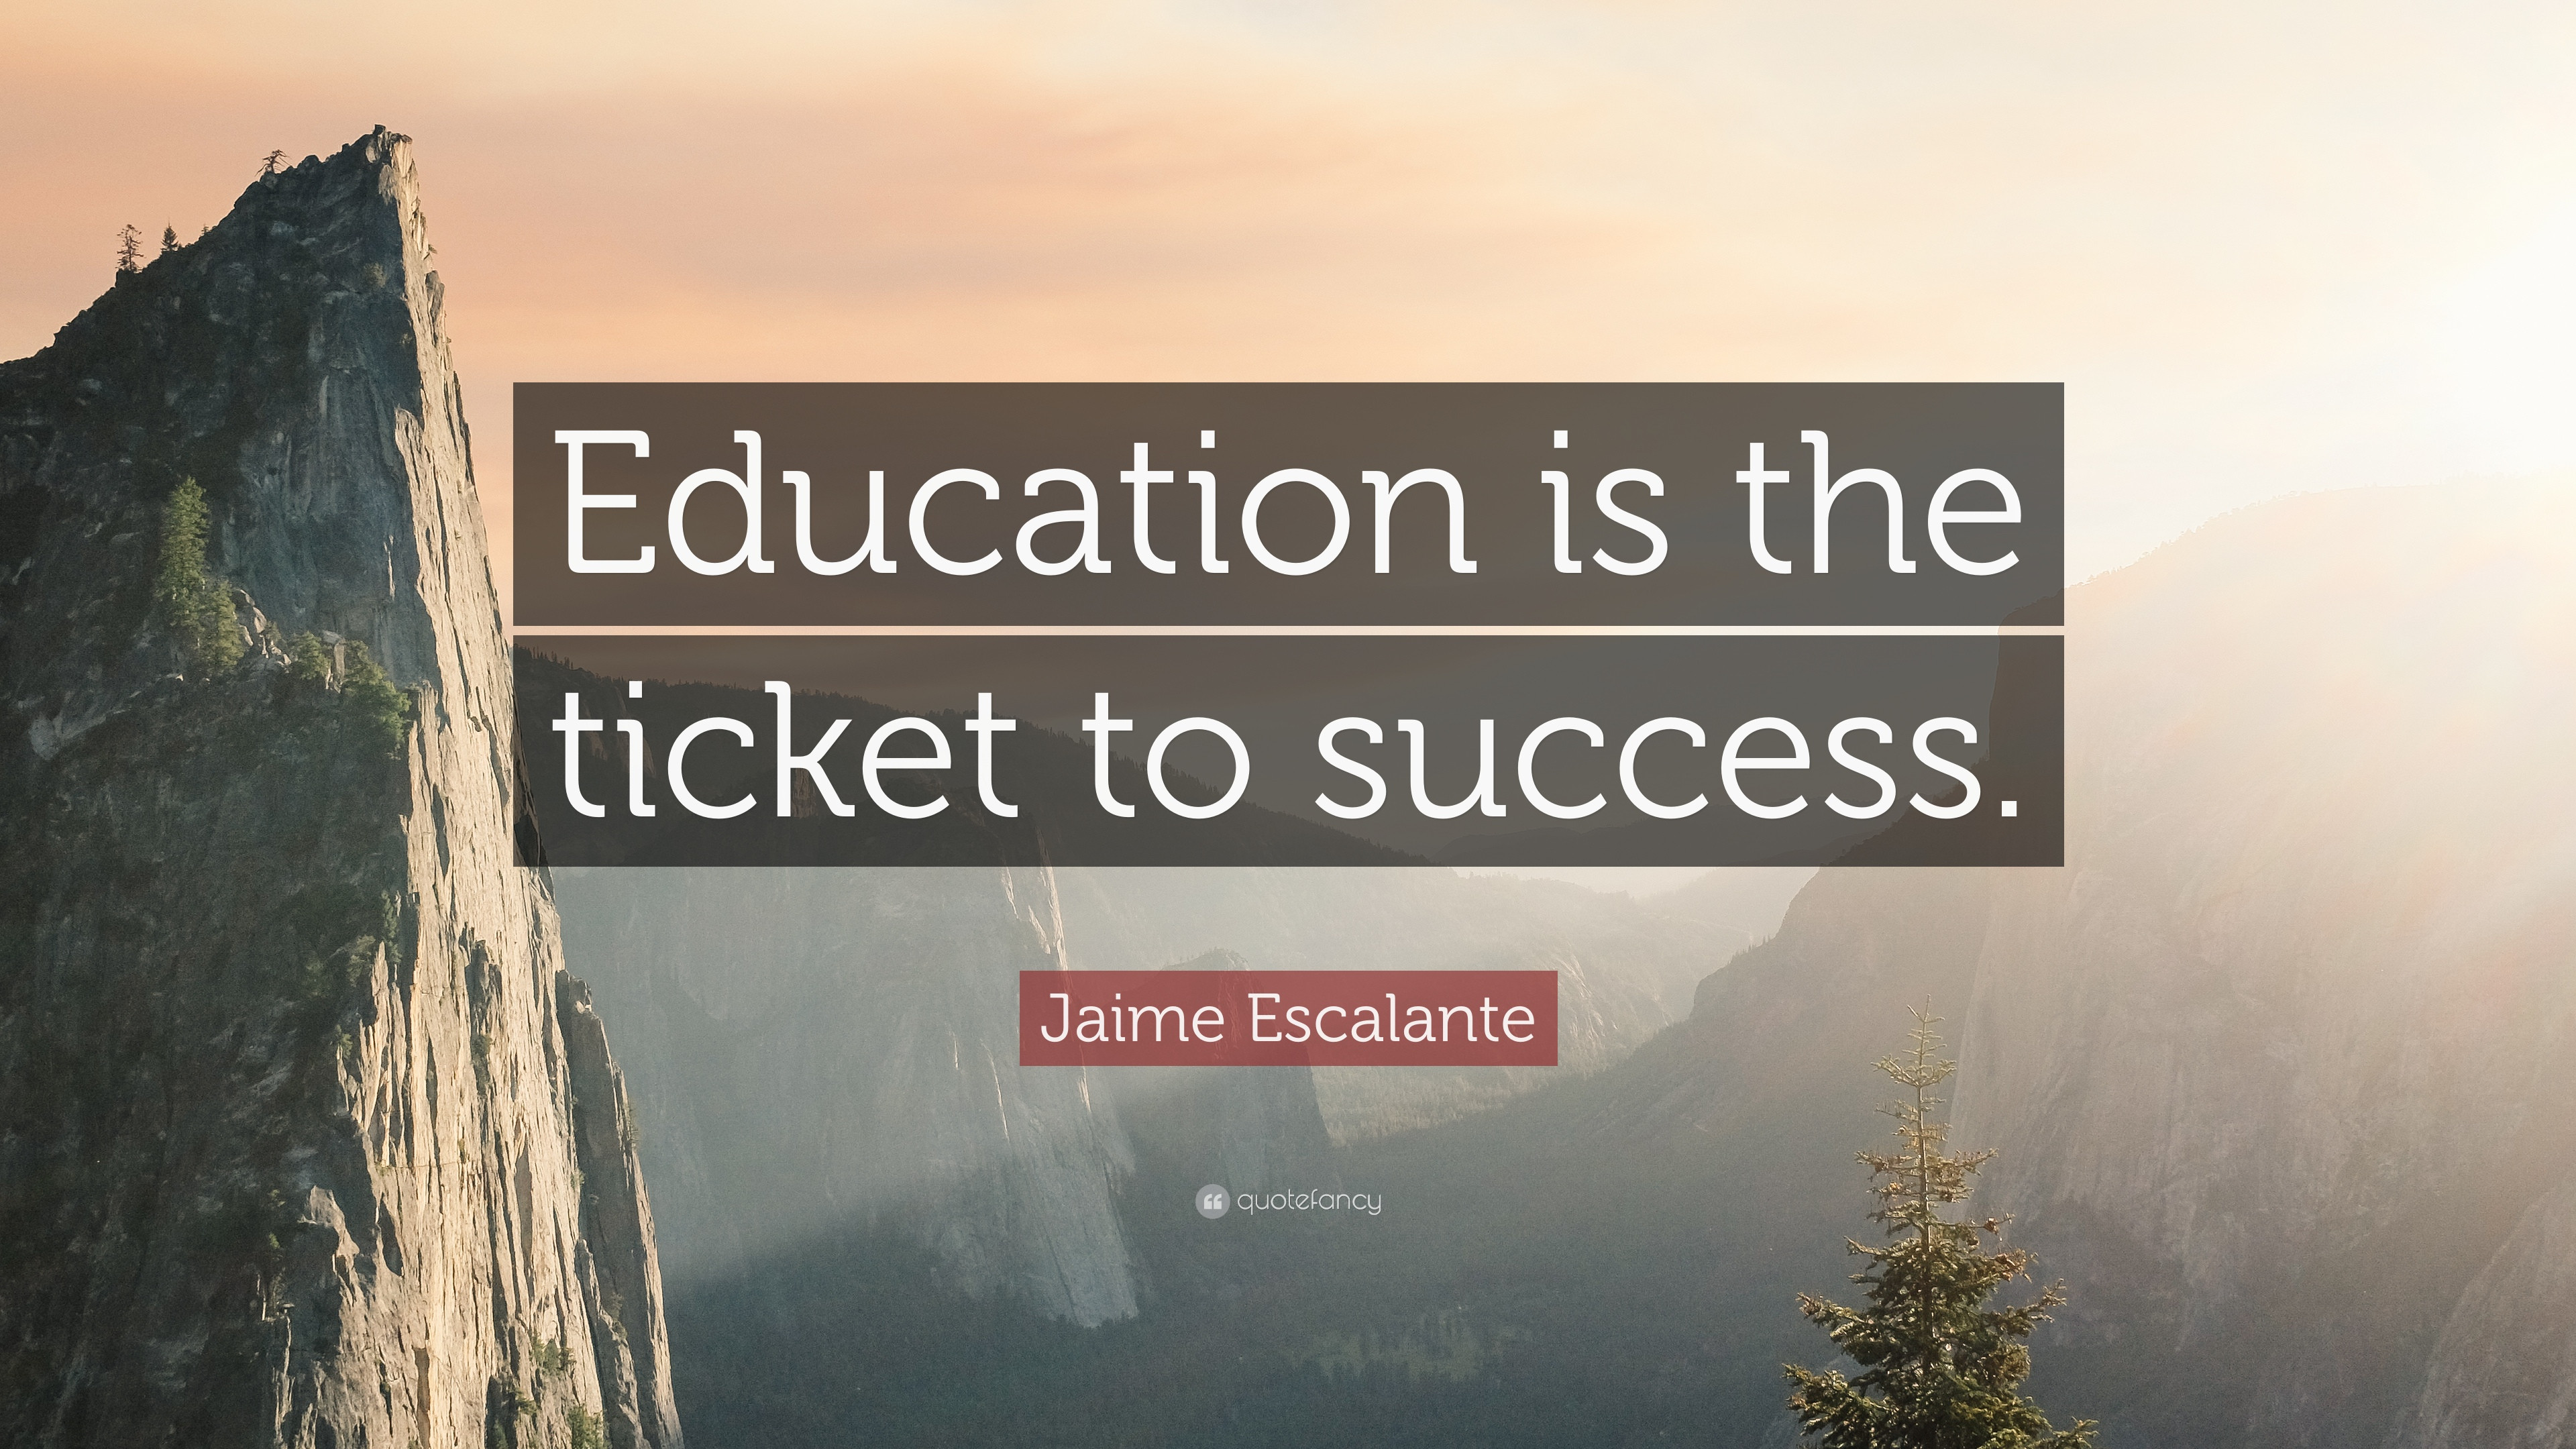 Quotes About Education And Success
 Jaime Escalante Quotes 9 wallpapers Quotefancy